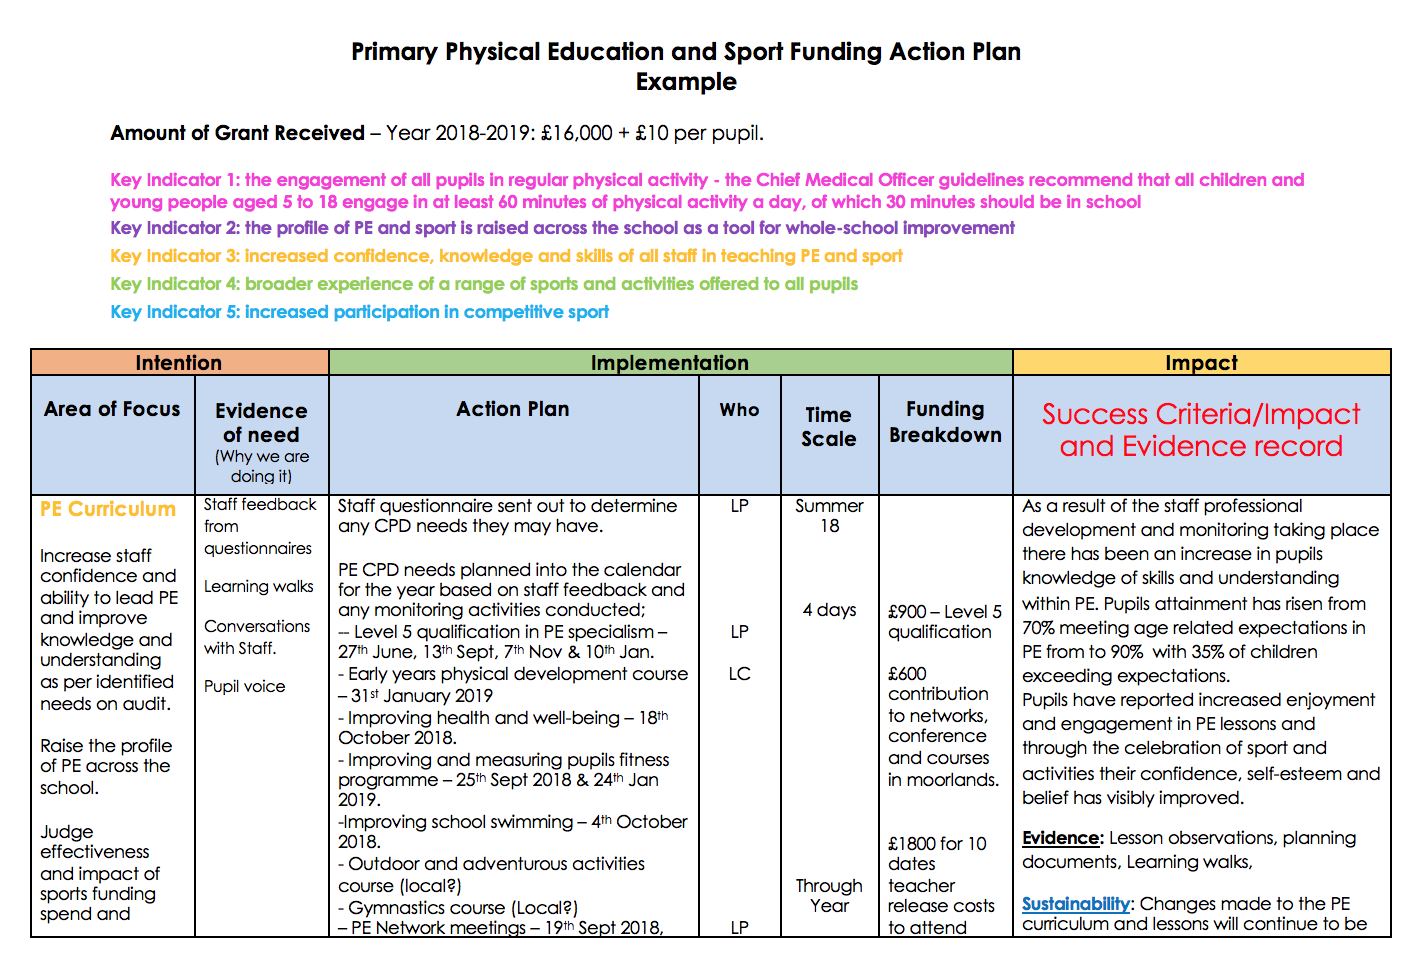 action plan templates for education